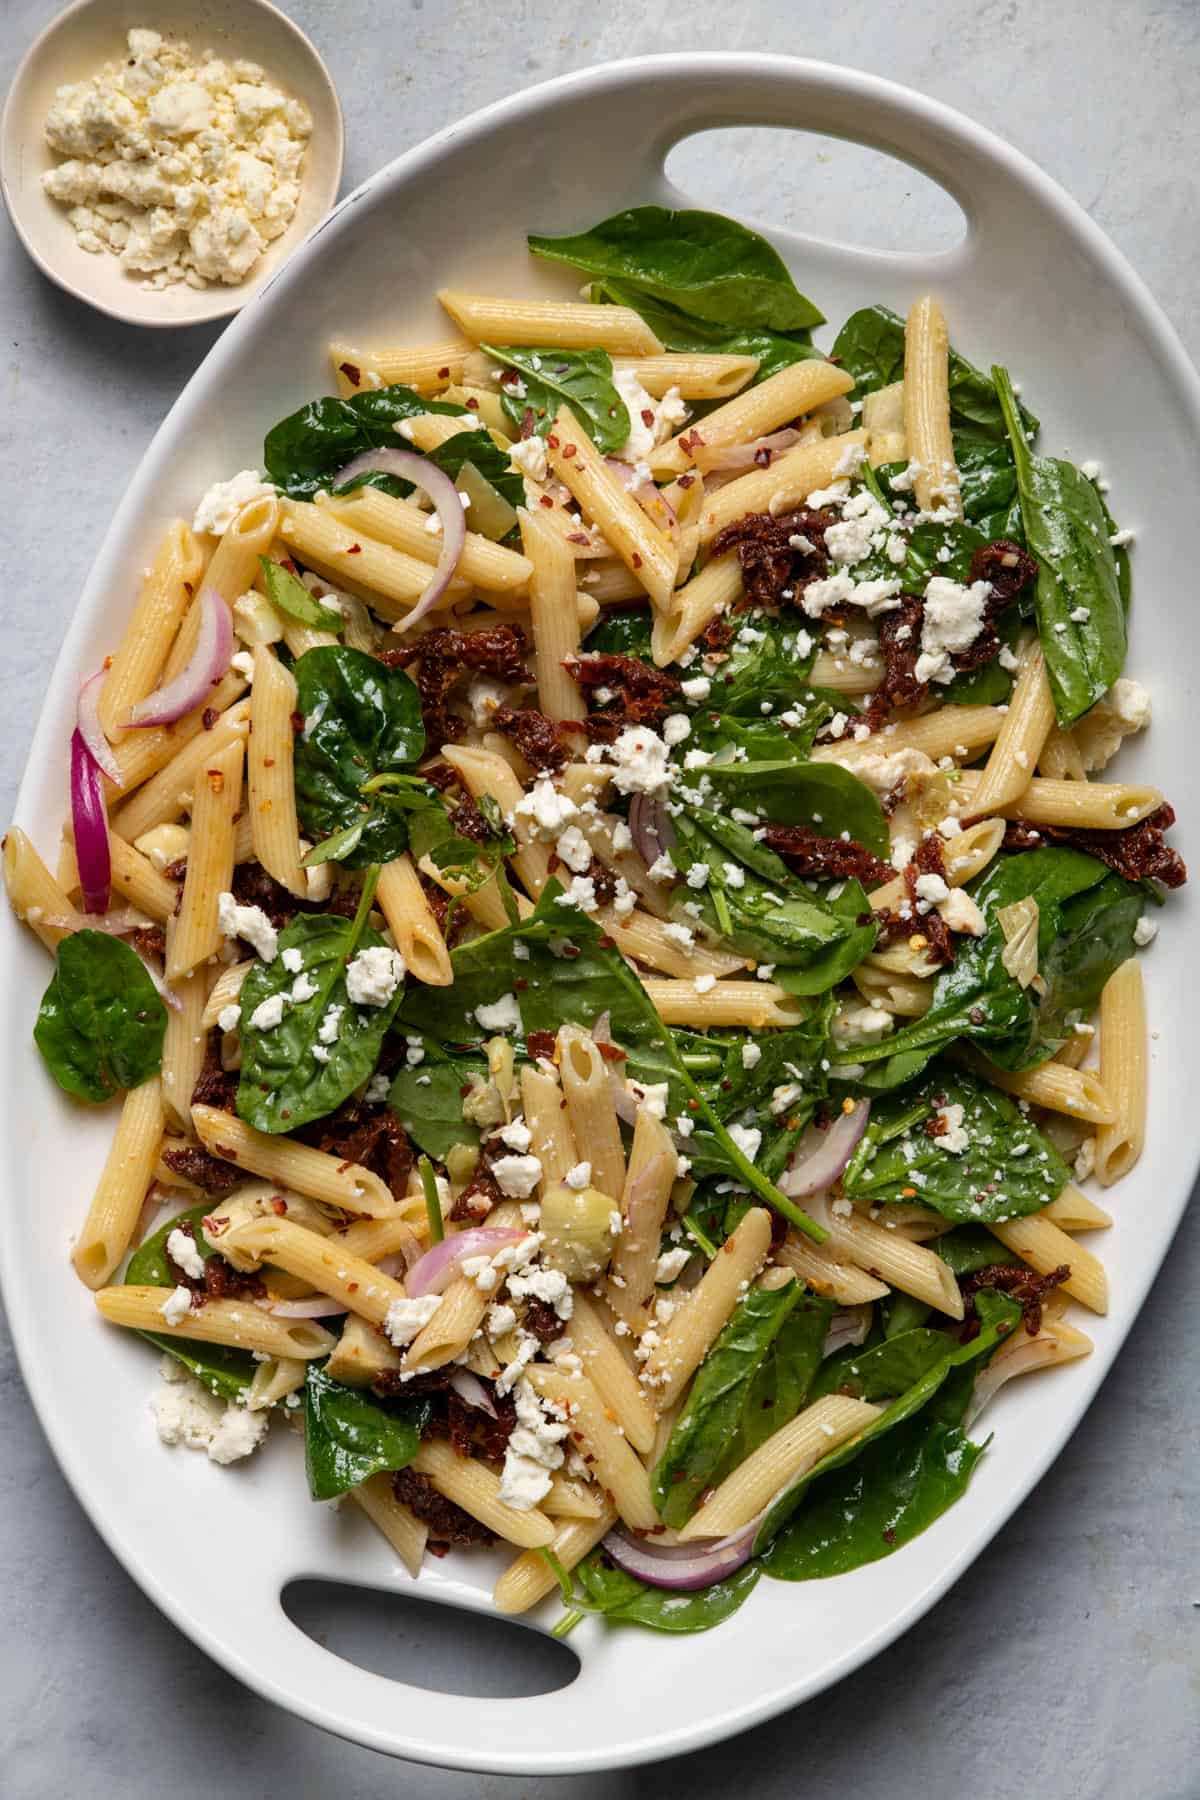 Large platter of spinach pasta salad served with sundried tomatoes and feta cheese